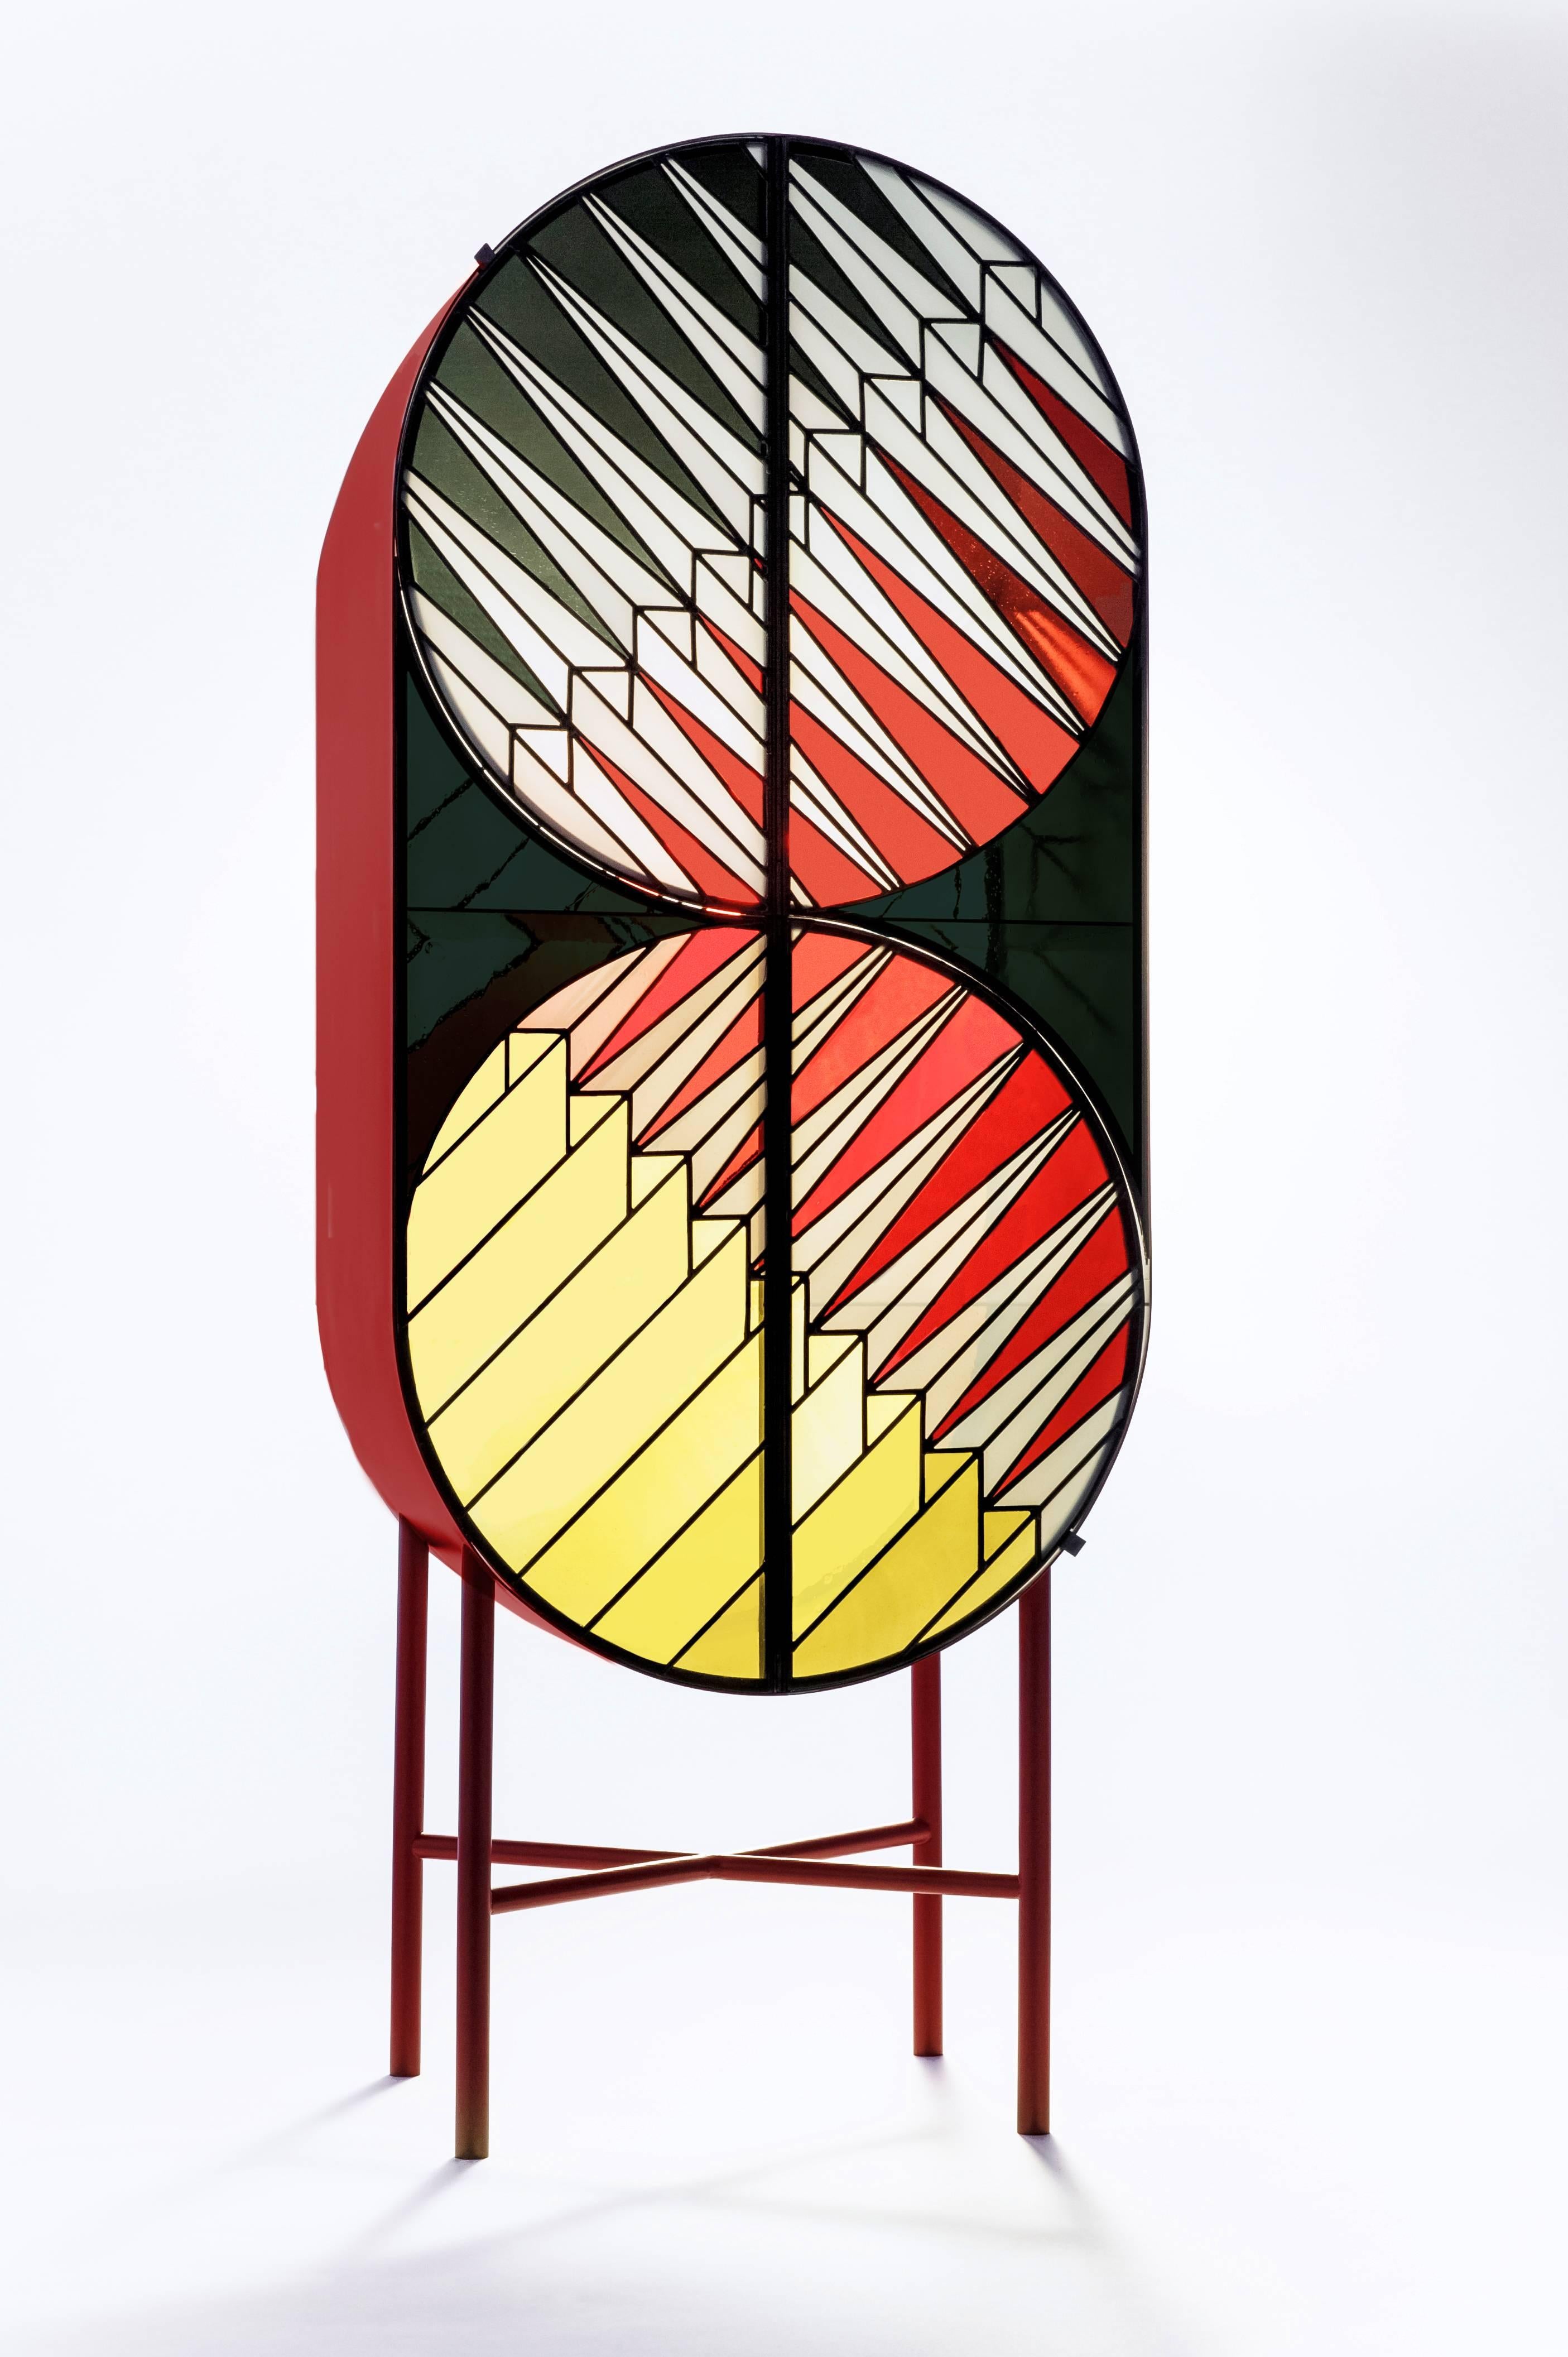 Cabinet produced in lacquered metal and stained glass. The pattern recalls a pyramid under the sun, where the “spines” are rays of light.
The cabinet is part a capsule collection inspired by the windows of holy sites as the ones created by Gerhard